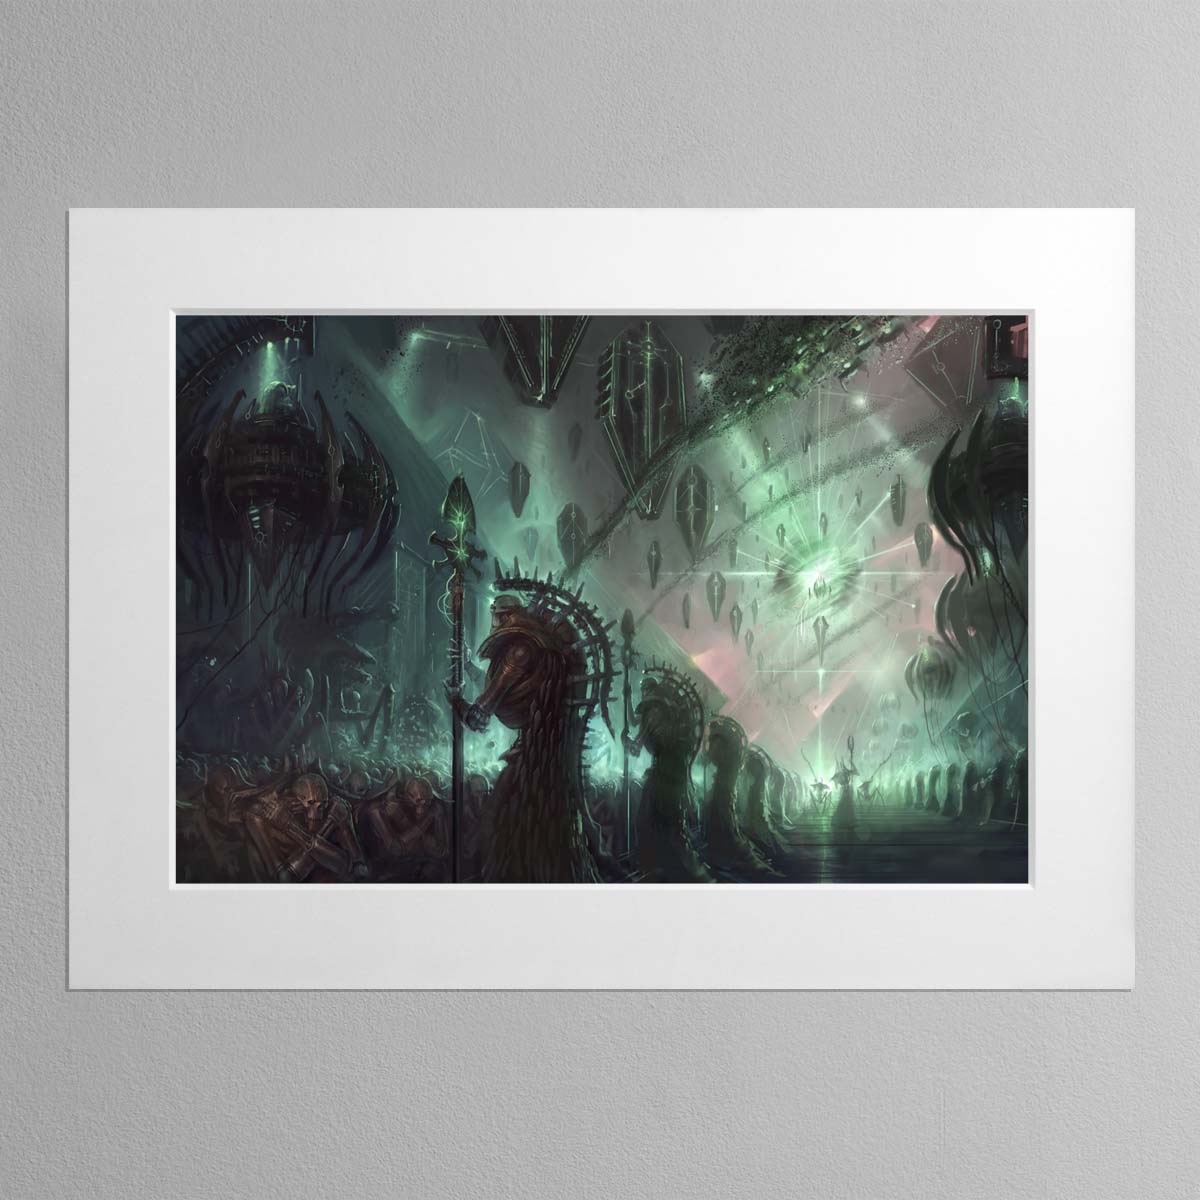 The Silent King Arrives – Mounted Print